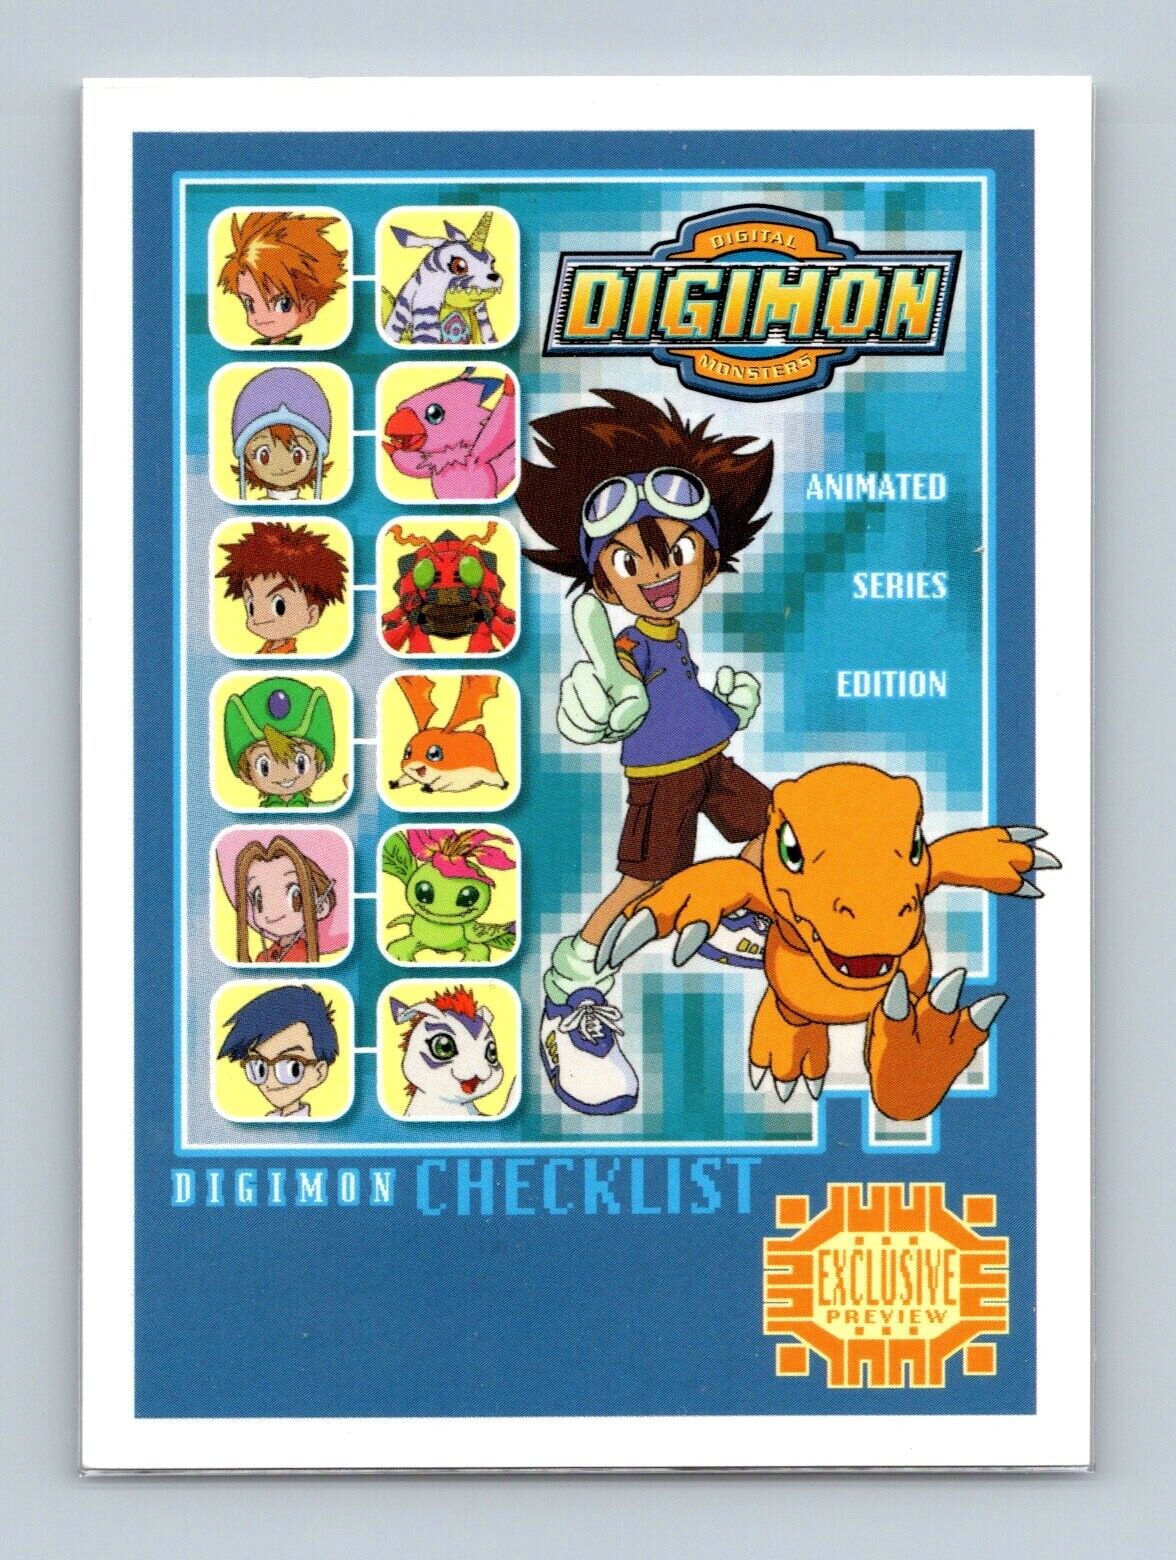 1999 Upper Deck Digimon Series 1 Checklist Exclusive Preview Animated Series NM